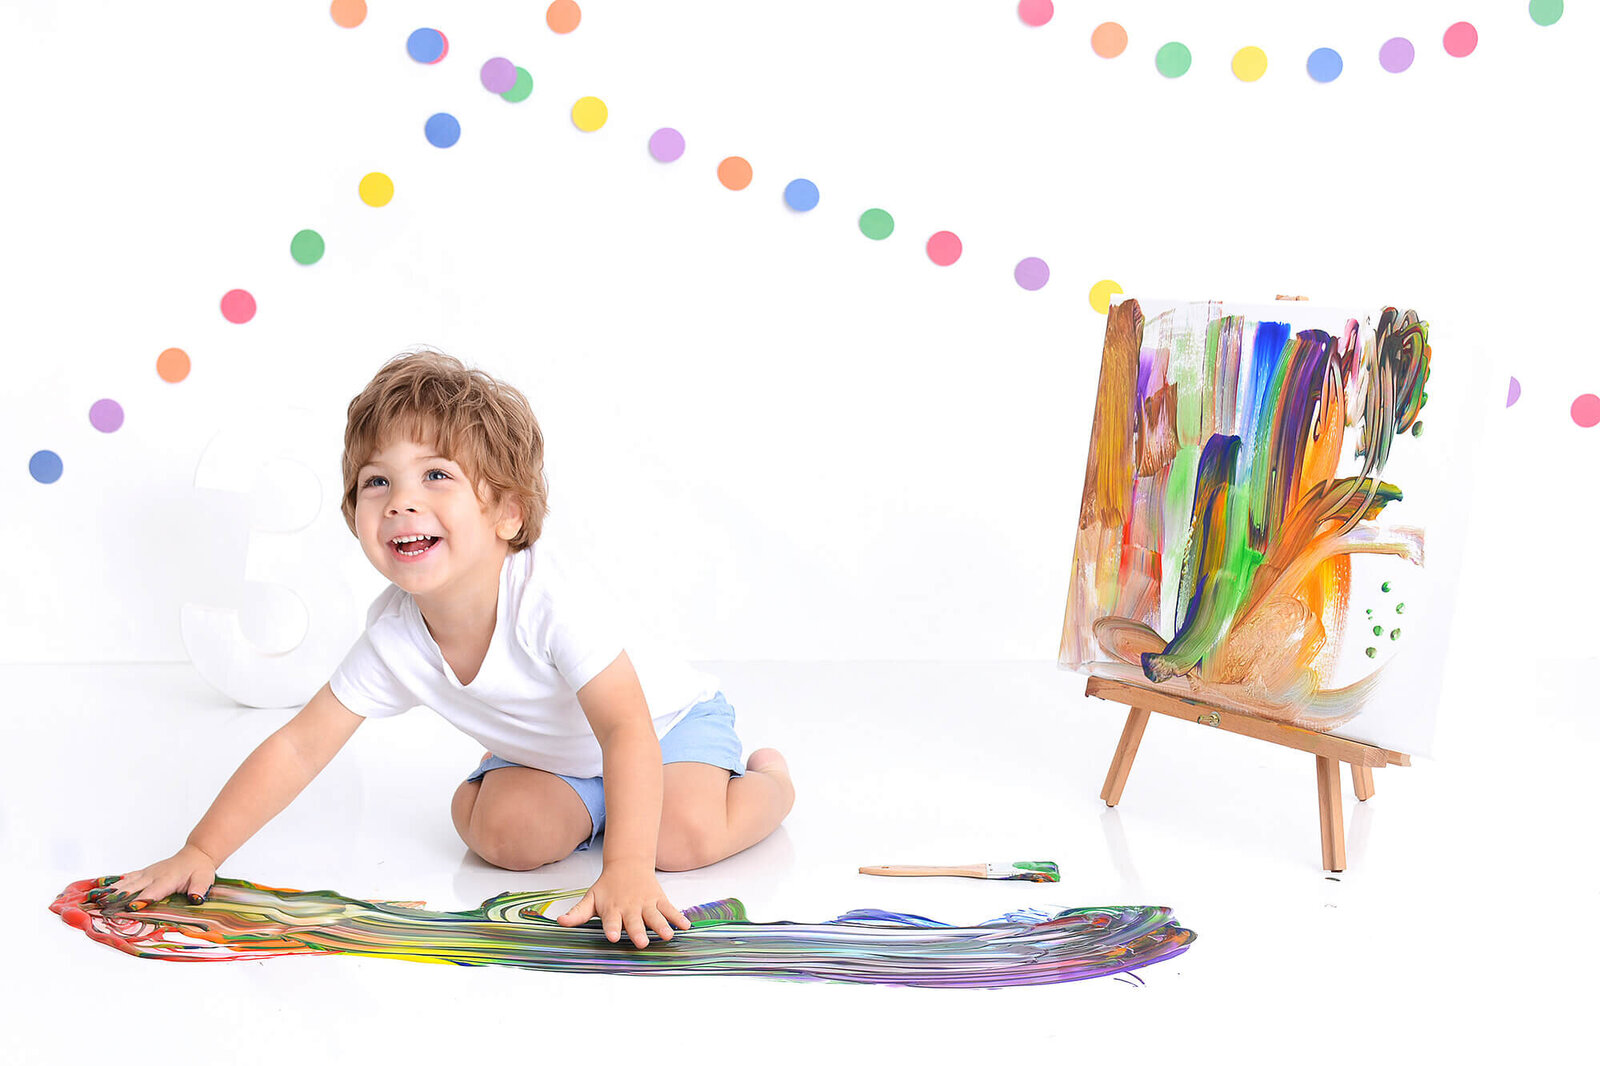 boy smiles and has fun playing with paint at his birthday photoshoot